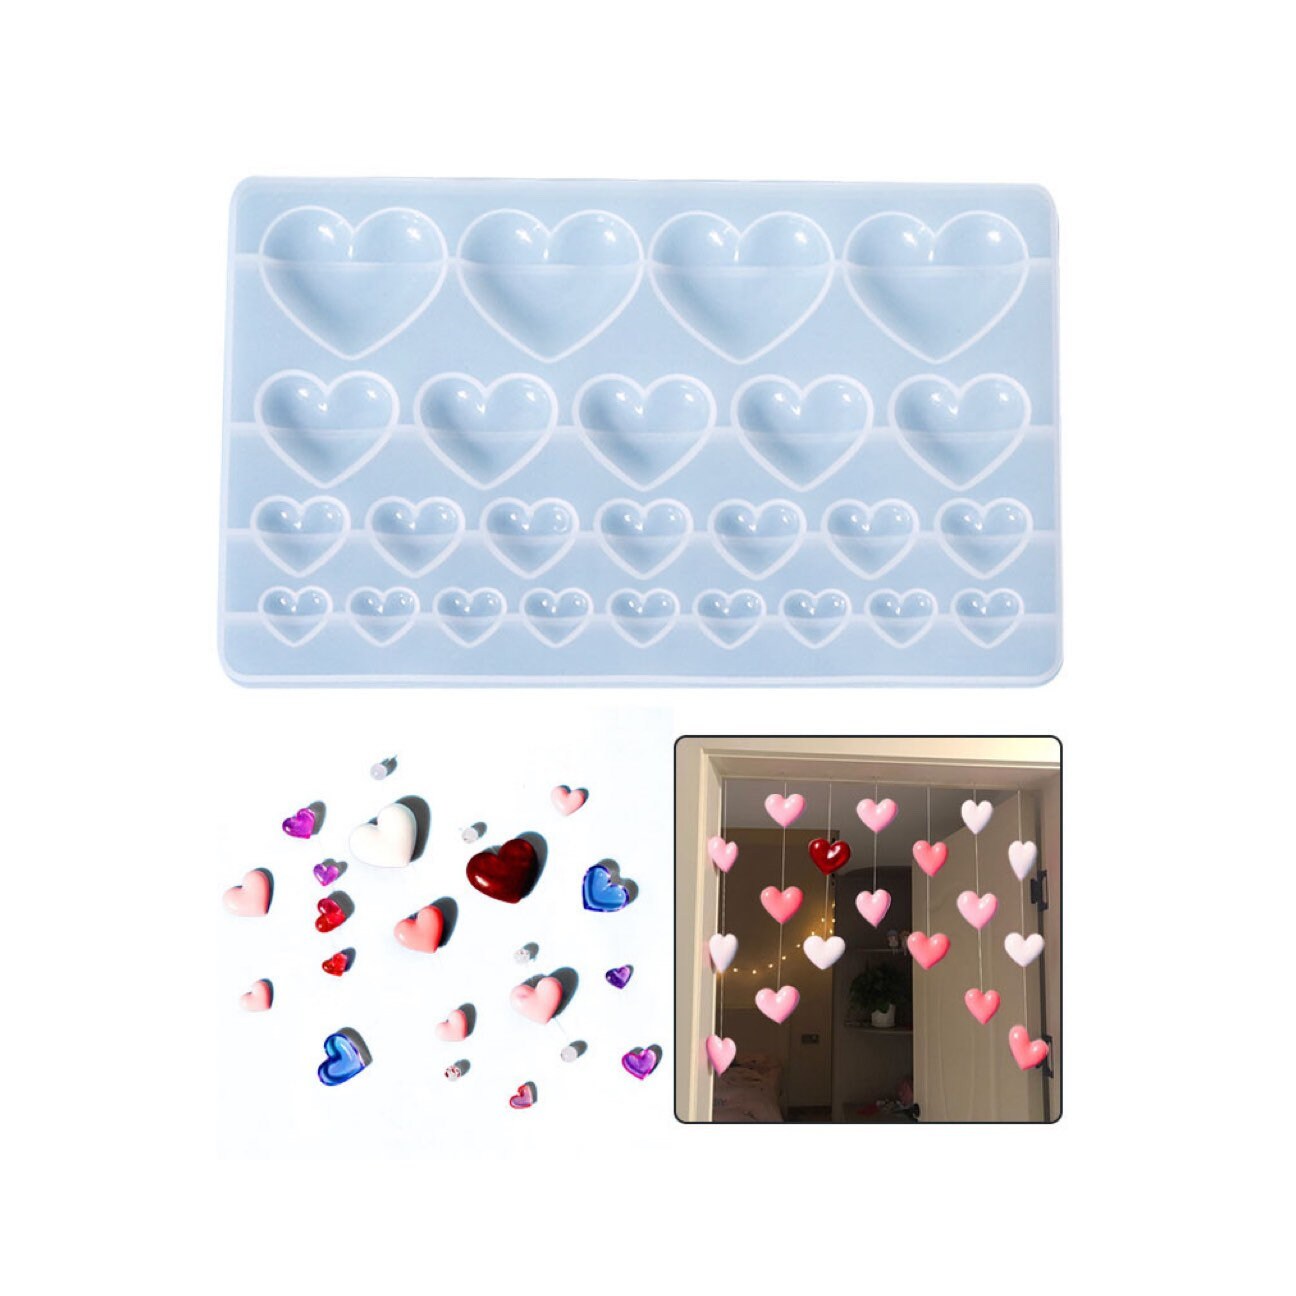 iSuperb 2pcs Heart Resin Molds Silicone Keychain Charms Mold for Epoxy  Resin Casting Molds Heart Pixel Mould Crystal 9-Cavity Heart Shaped Molds